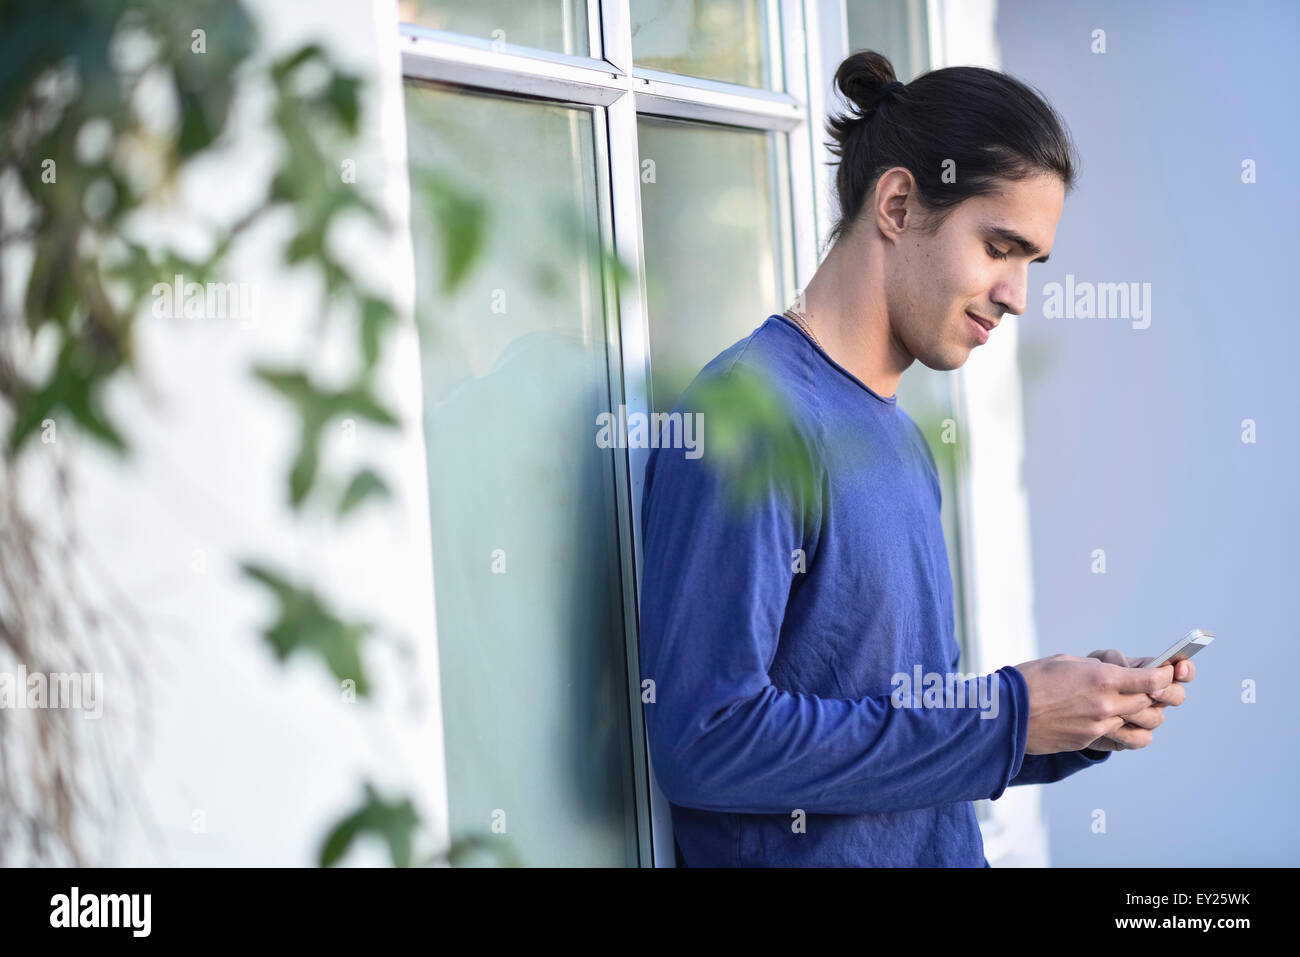 Young man using mobile phone Stock Photo